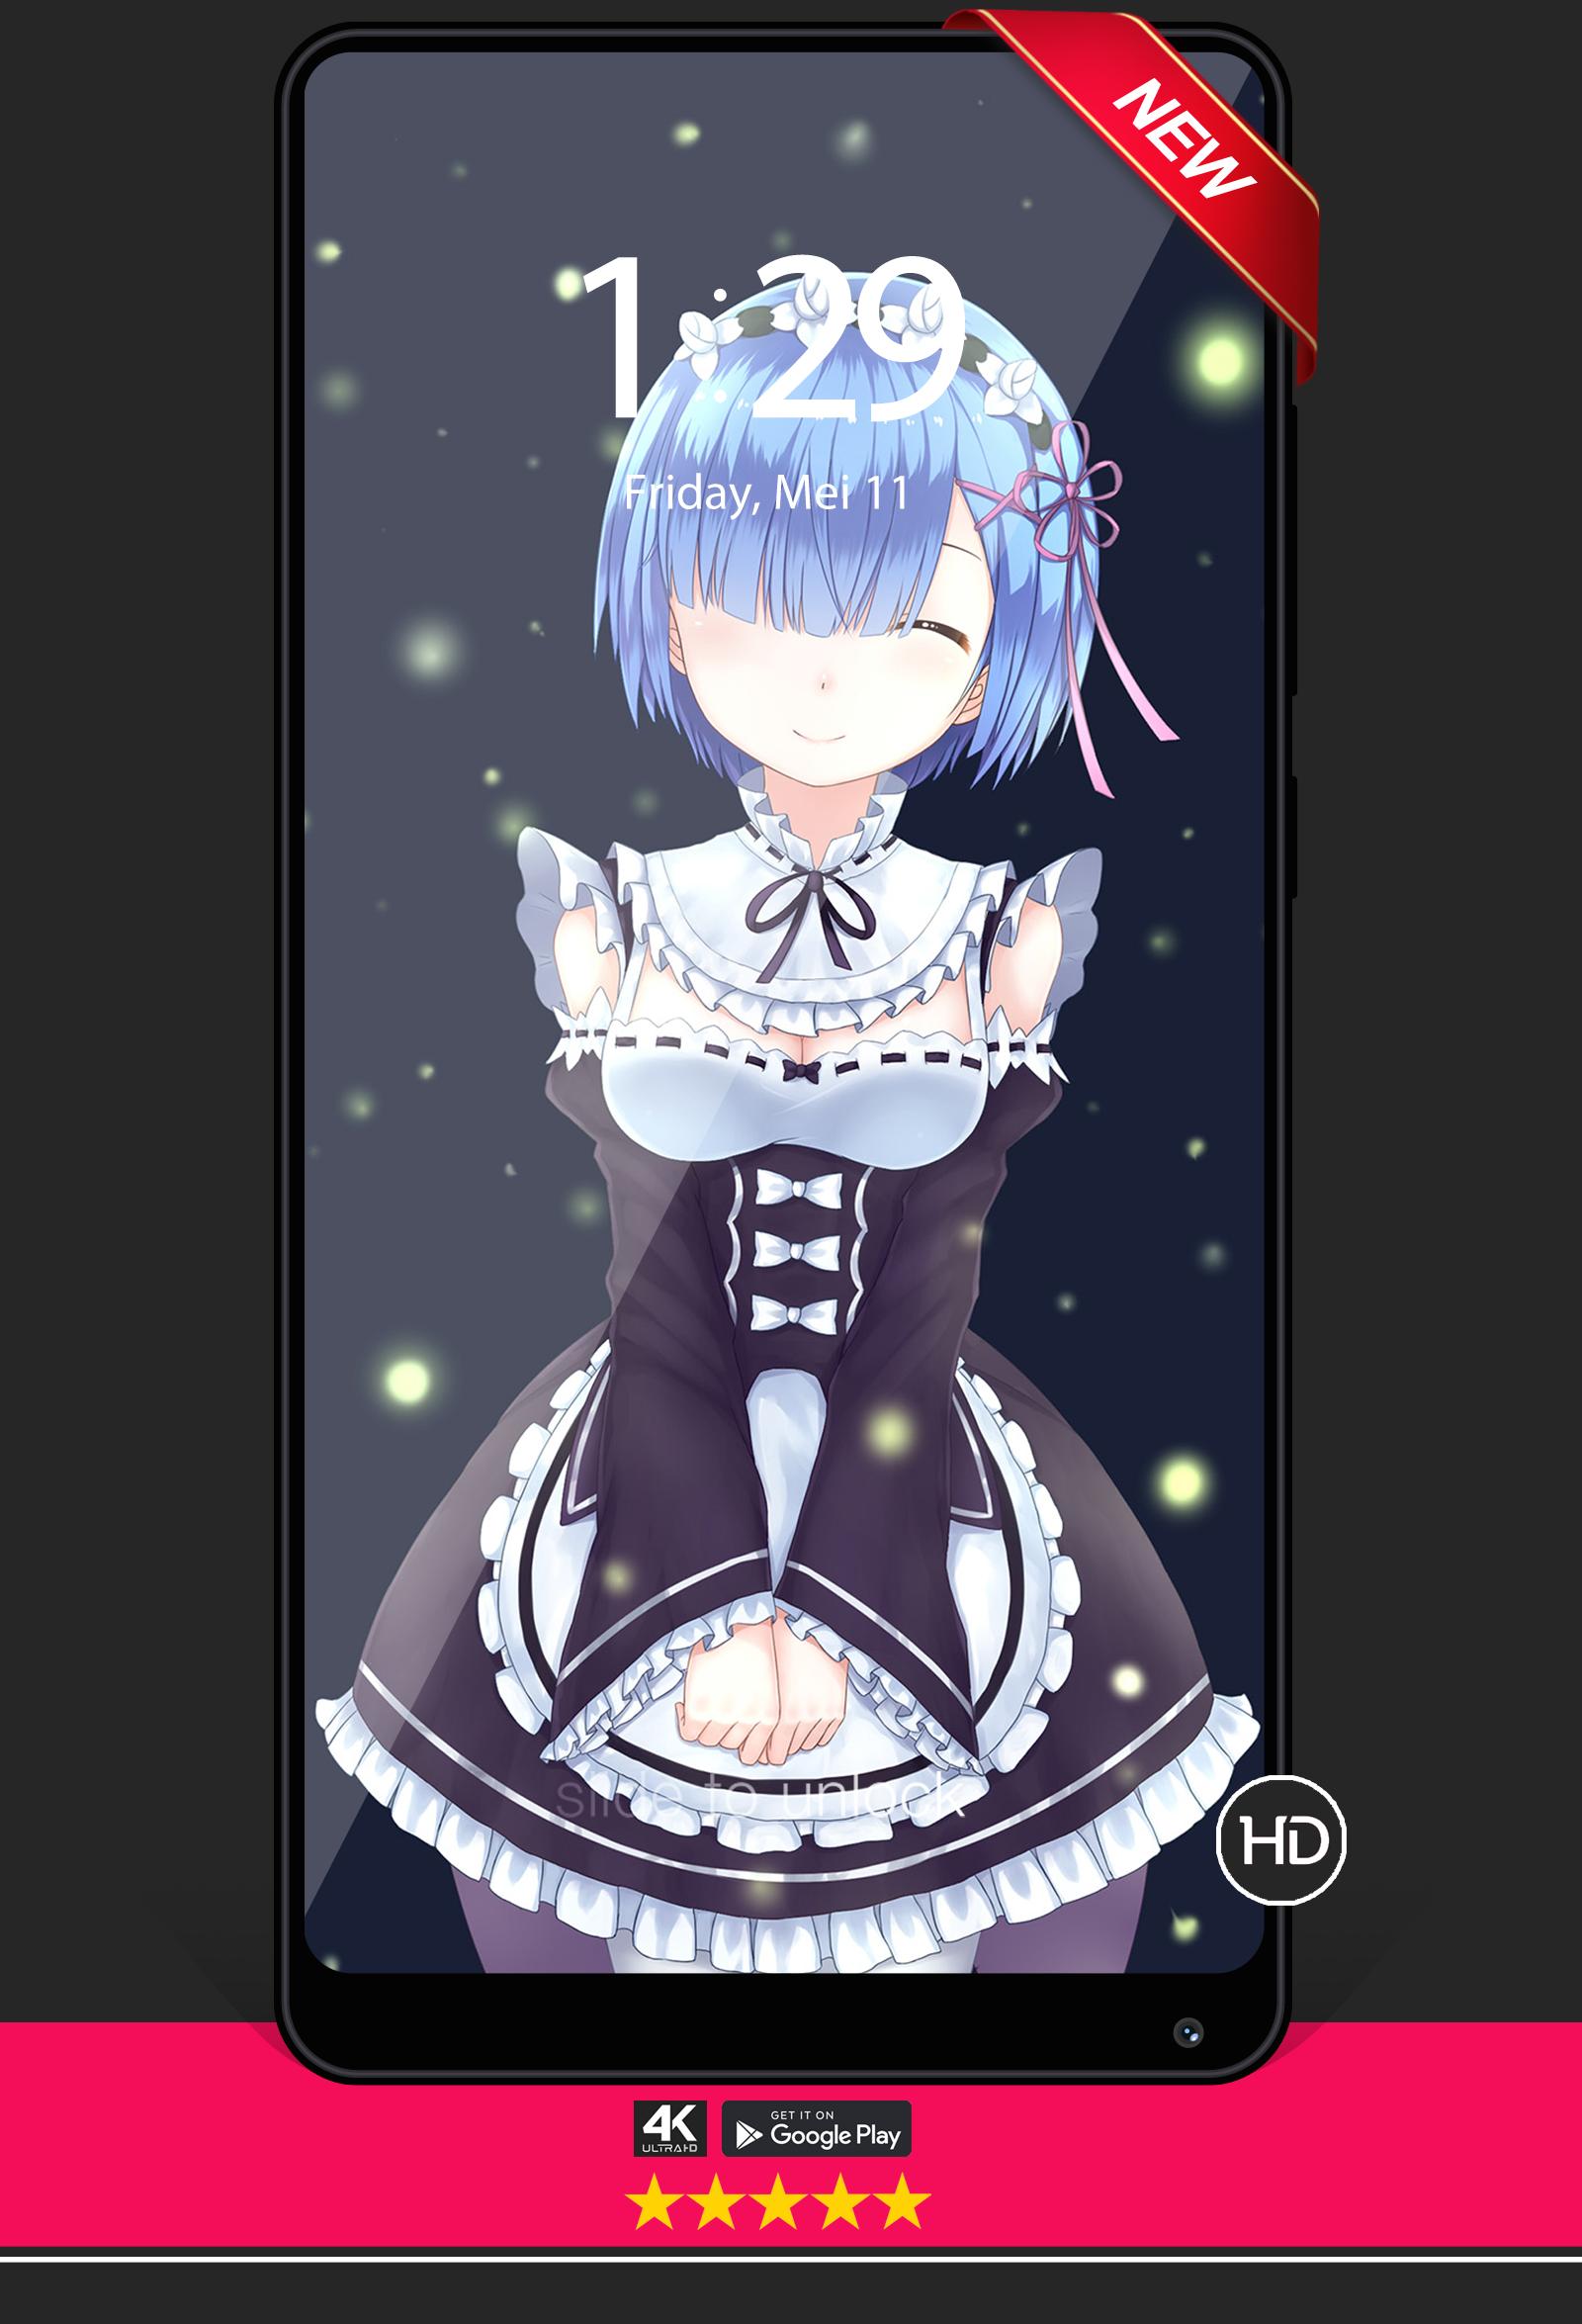 Rem - Ram Wallpapers for Android - APK Download